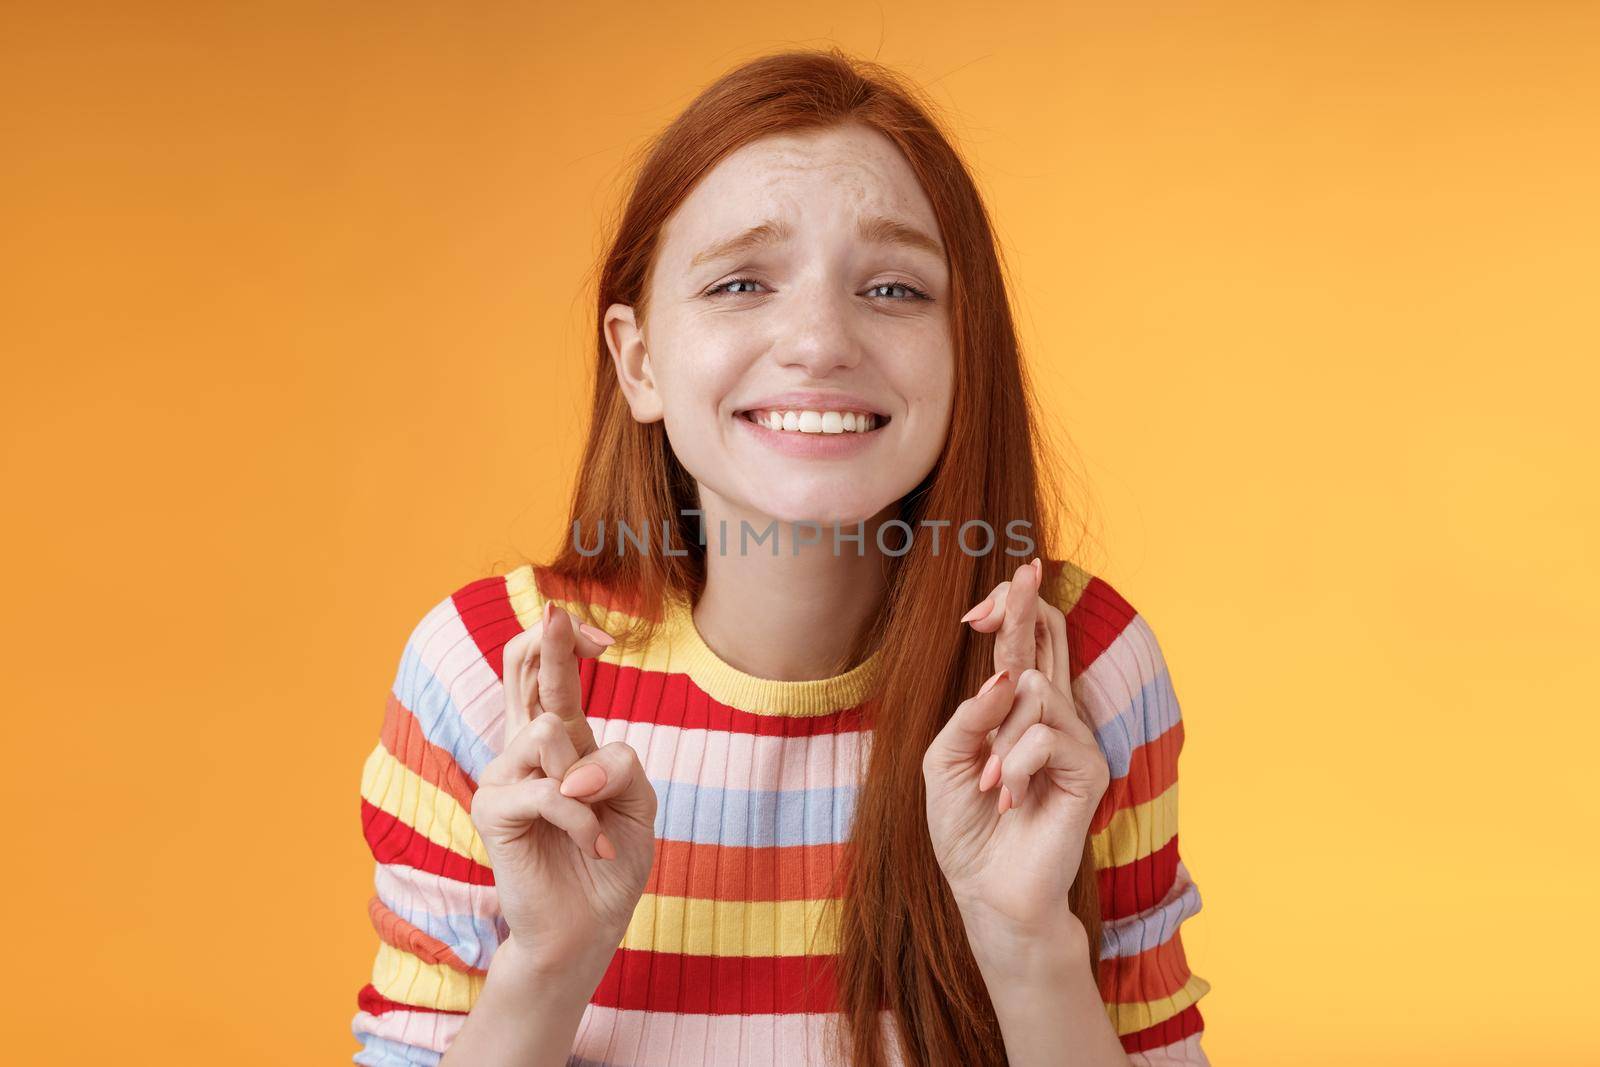 Attractive redhead hopeful girl anticipating good news excitement thrill cross fingers good luck smiling broadly praying wish come true good results receive prize, standing orange background desire.